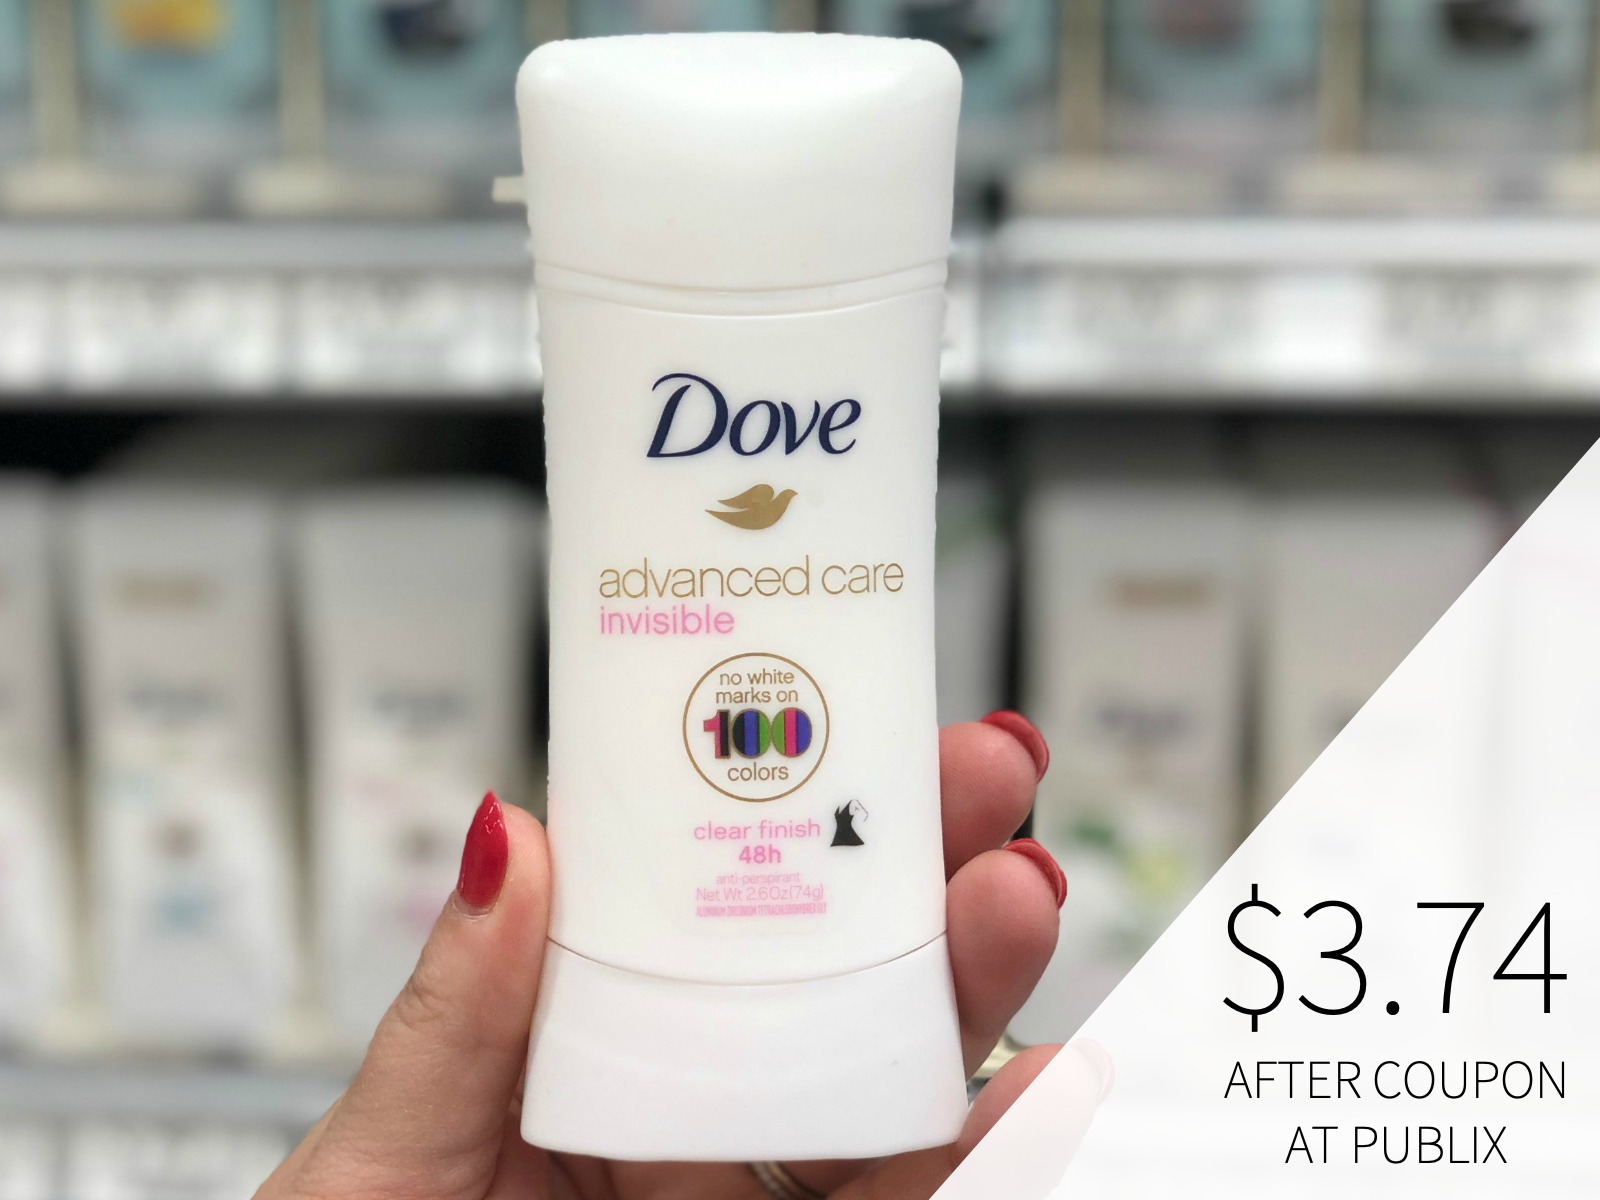 Find Fantastic Deals On Your Favorite Dove Products At Publix + Learn More About The Dove Self-Esteem Project on I Heart Publix